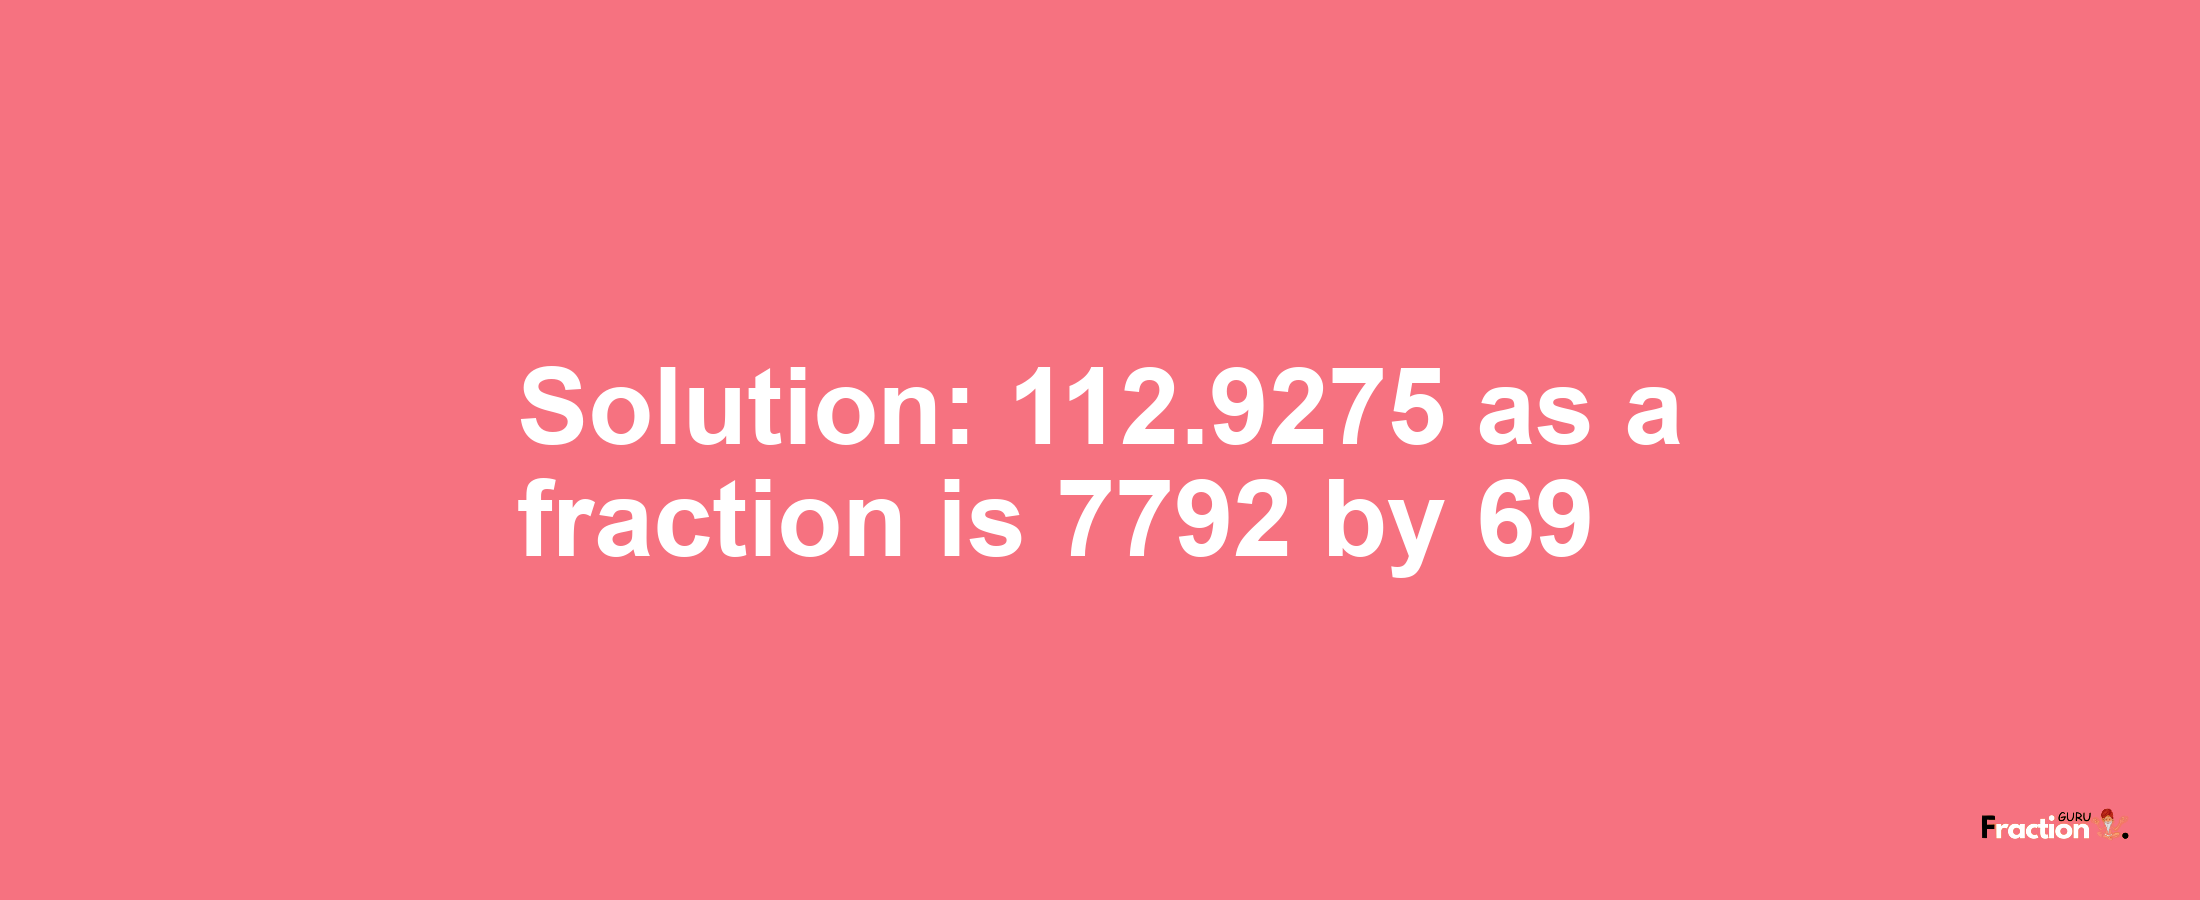 Solution:112.9275 as a fraction is 7792/69